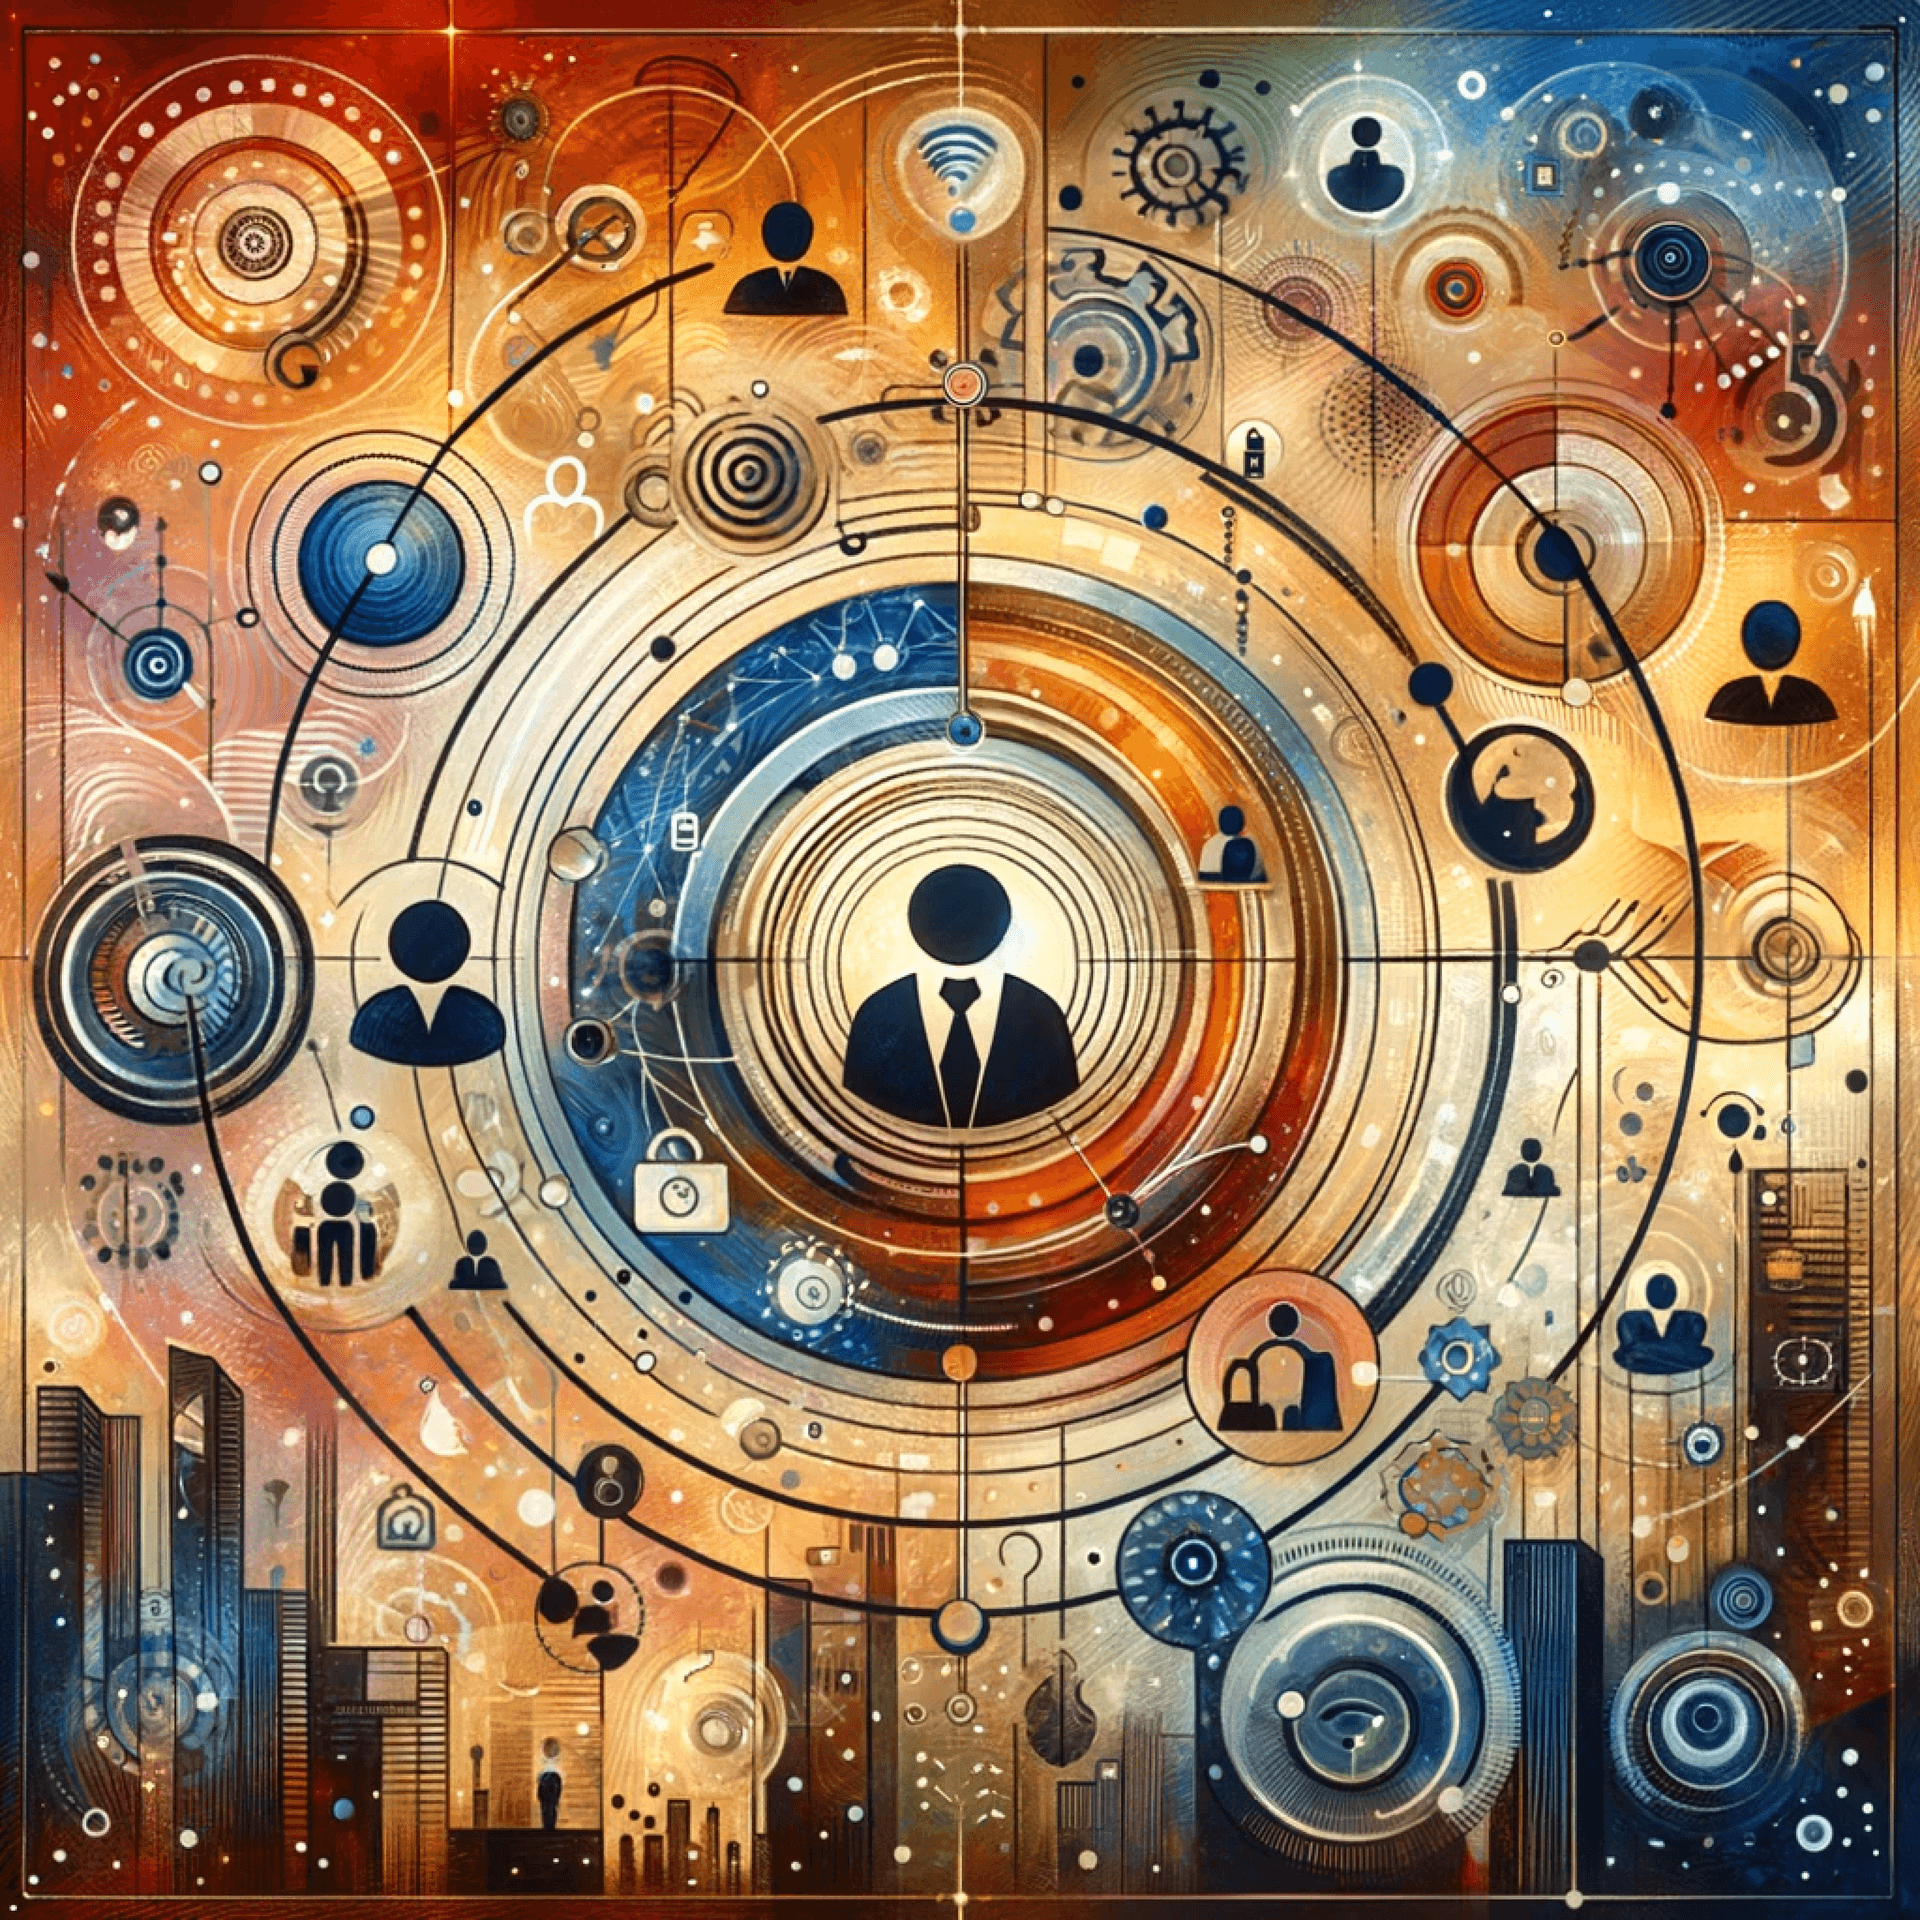 abstract image that embodies a client-centric philosophy in a corporate setting. Business world orbiting around the customer, with visual elements like concentric circles, interconnected networks, and figures with open postures representing attentiveness and service. Motifs include handshakes, dialogue bubbles, and feedback loops depicting strong client relationships and communication. The color palette is warm and inviting, with tones suggesting trust, reliability, and a welcoming atmosphere. This image conveying the importance of the client the SMB ecosystem, illustrates our dedication to customer satisfaction and bespoke experiences.